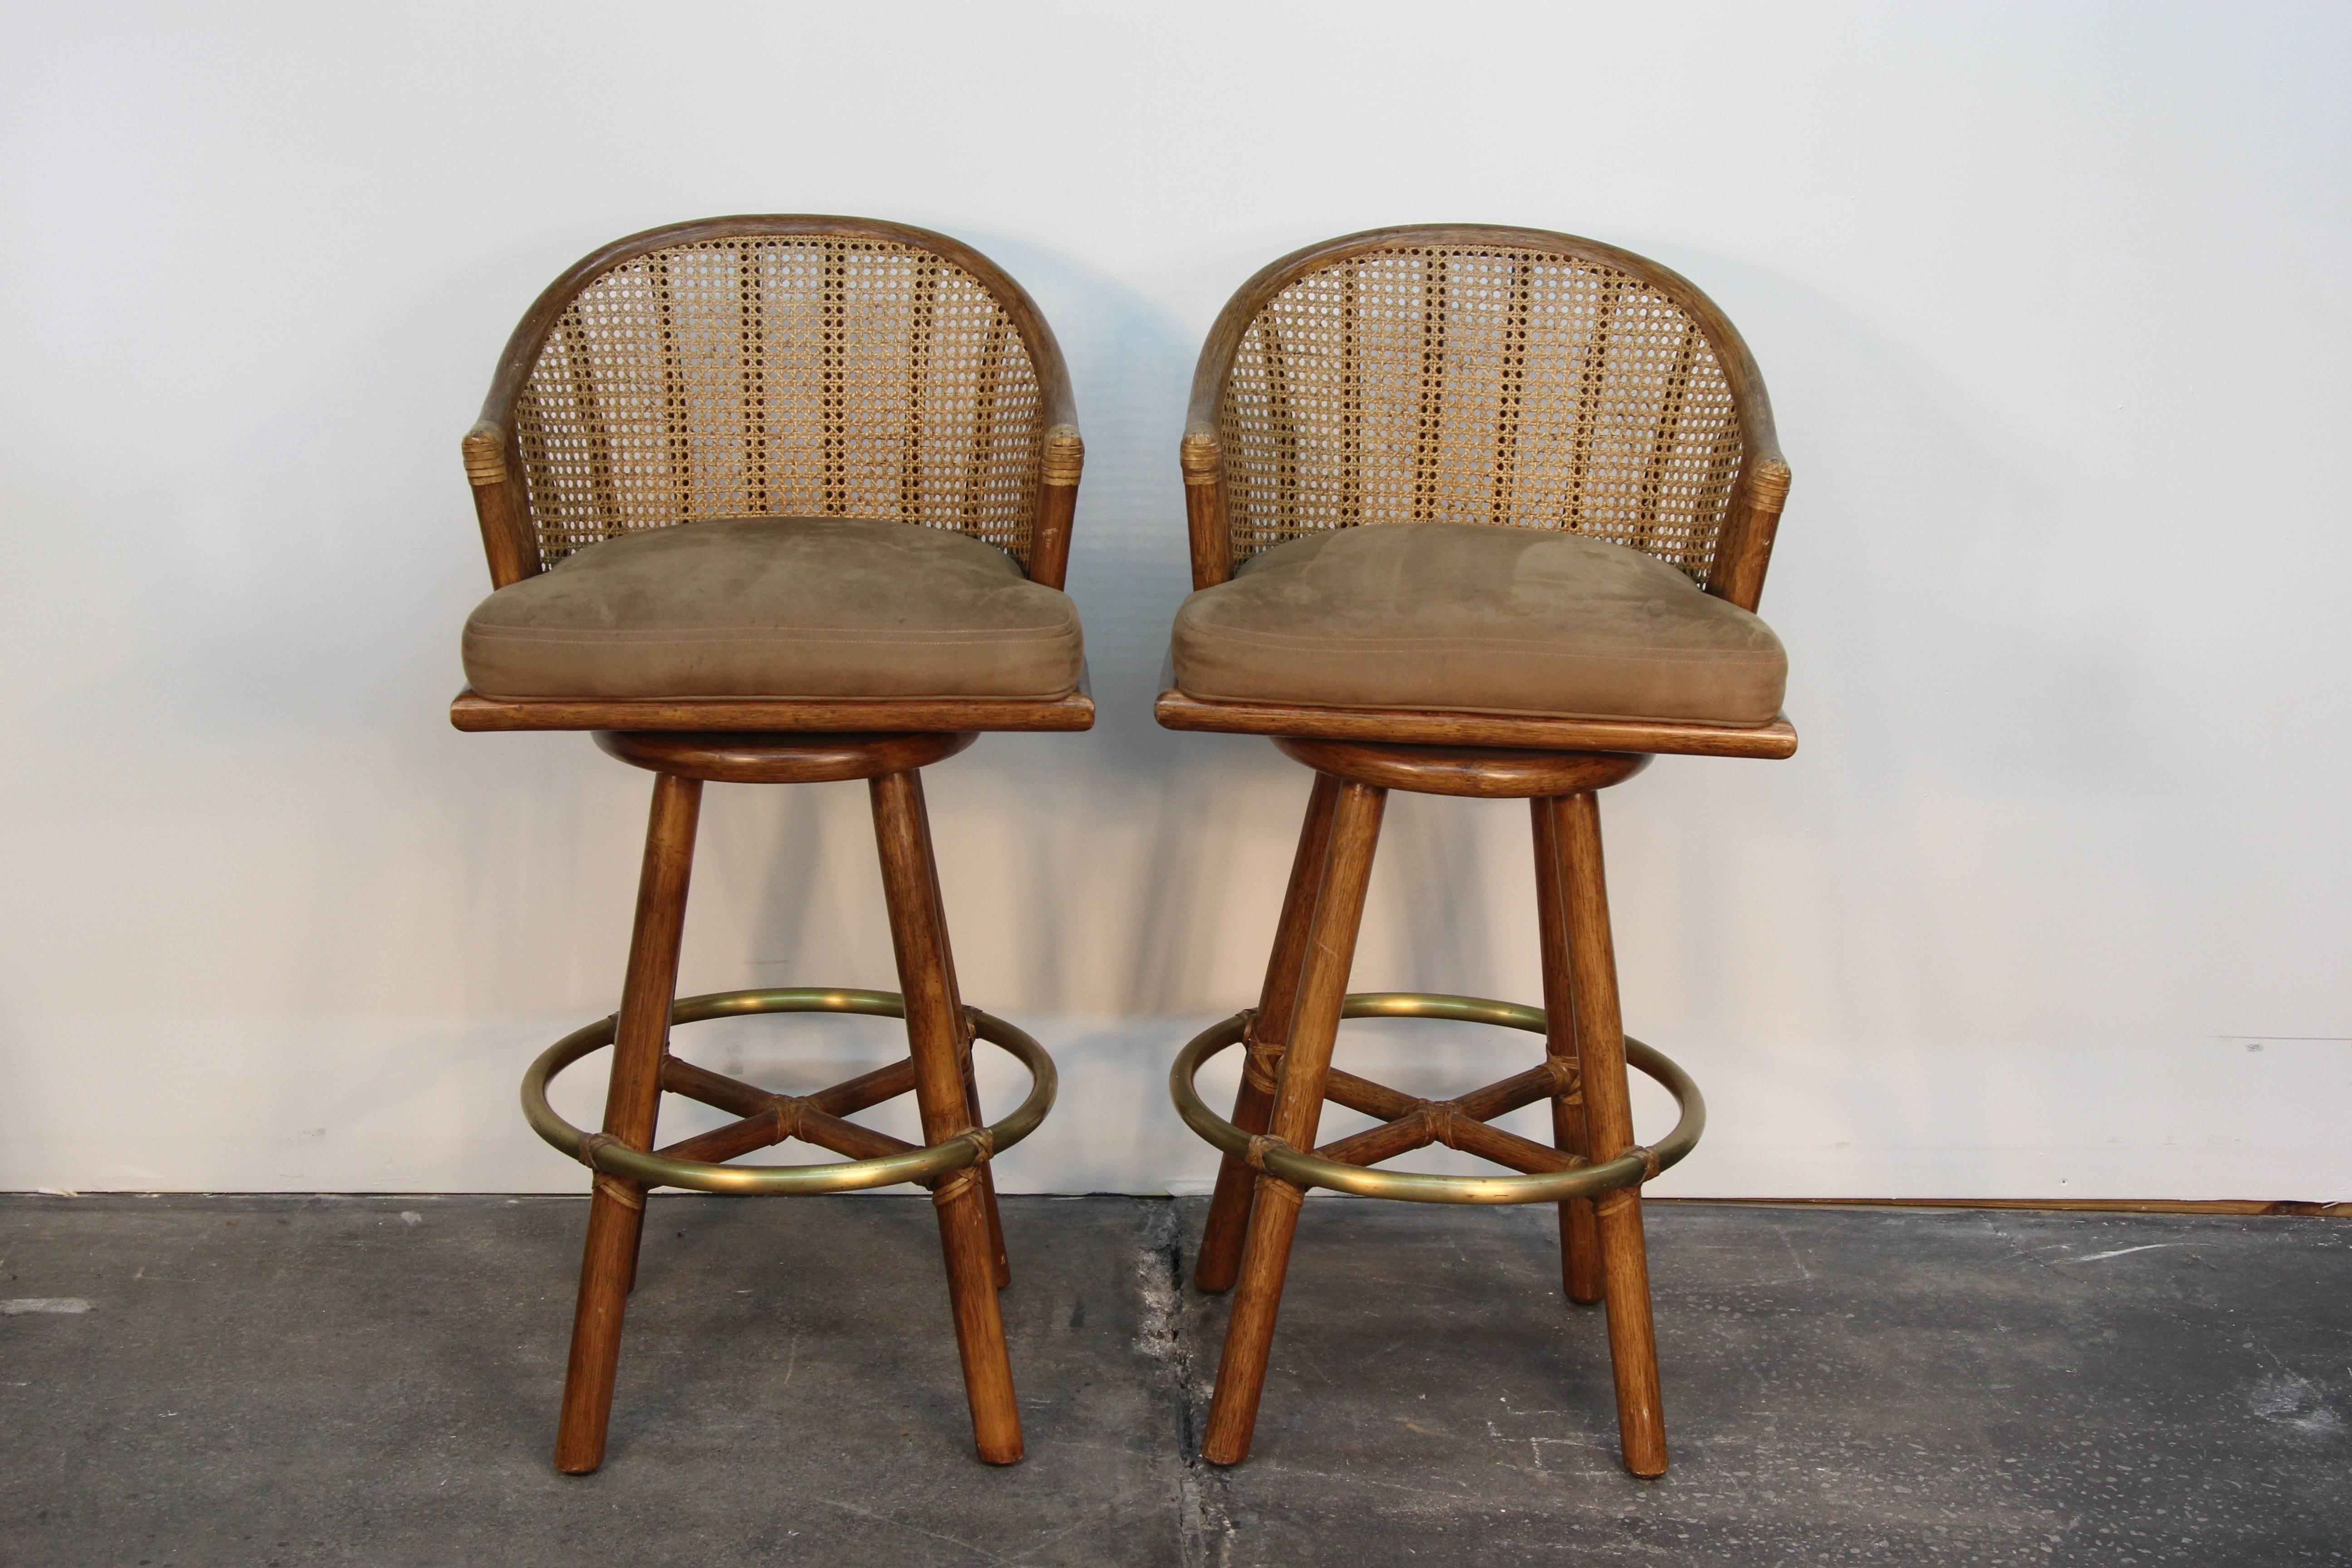 Two Mid-Century rattan swivel bar stools with rattan backs, leather bindings and brass foot rest.